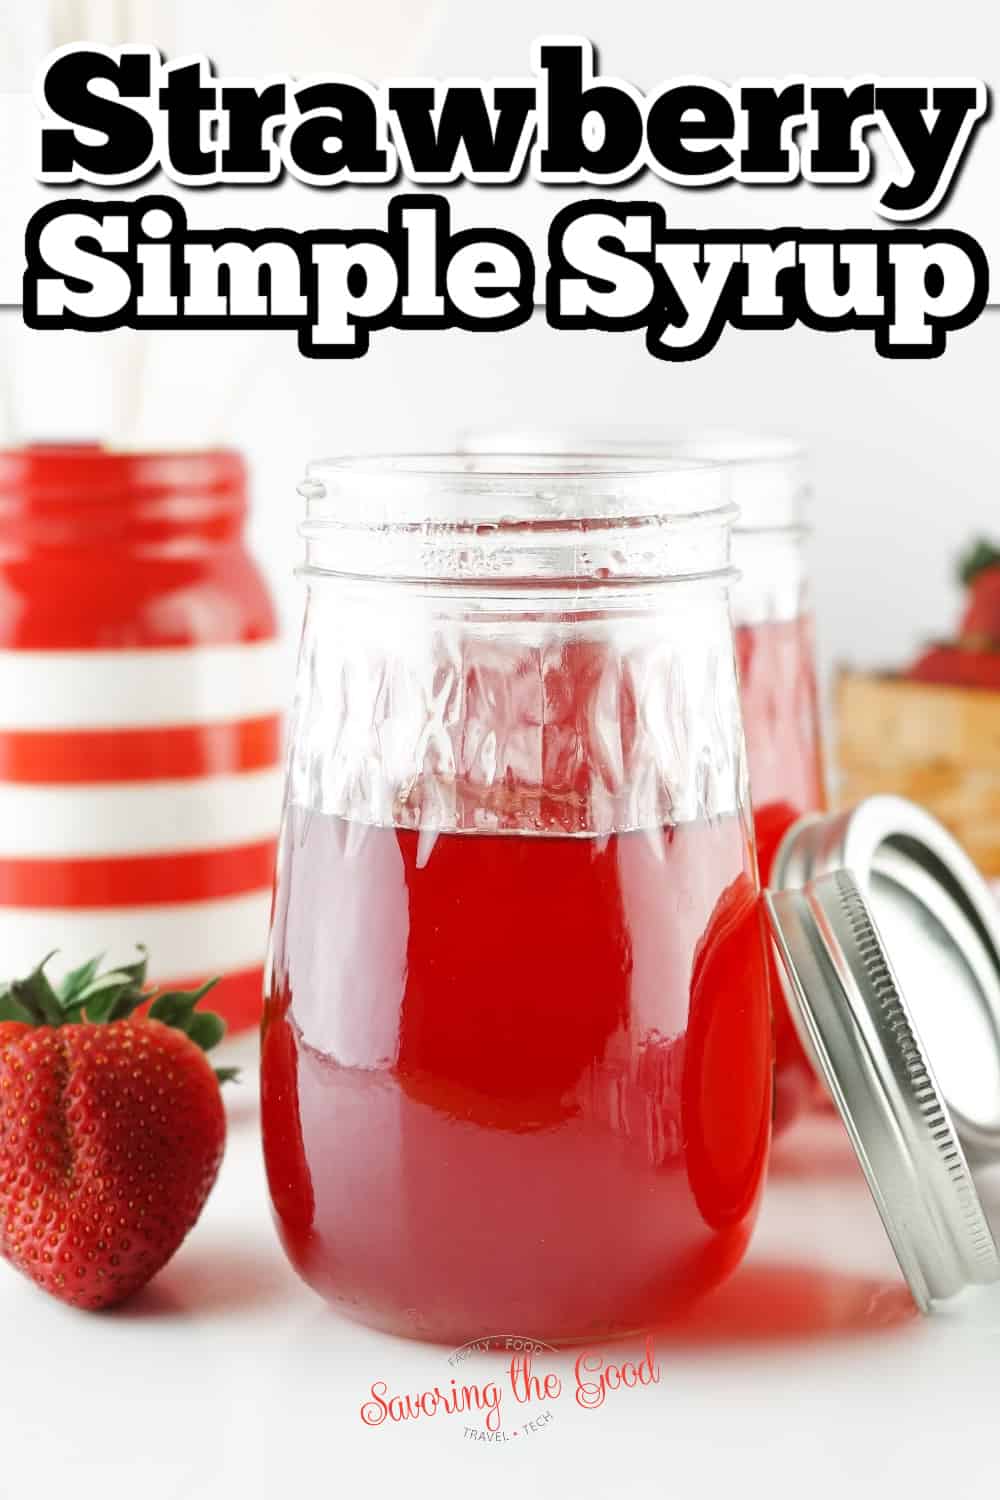 Strawberry Simple Syrup Recipe pinterst 2